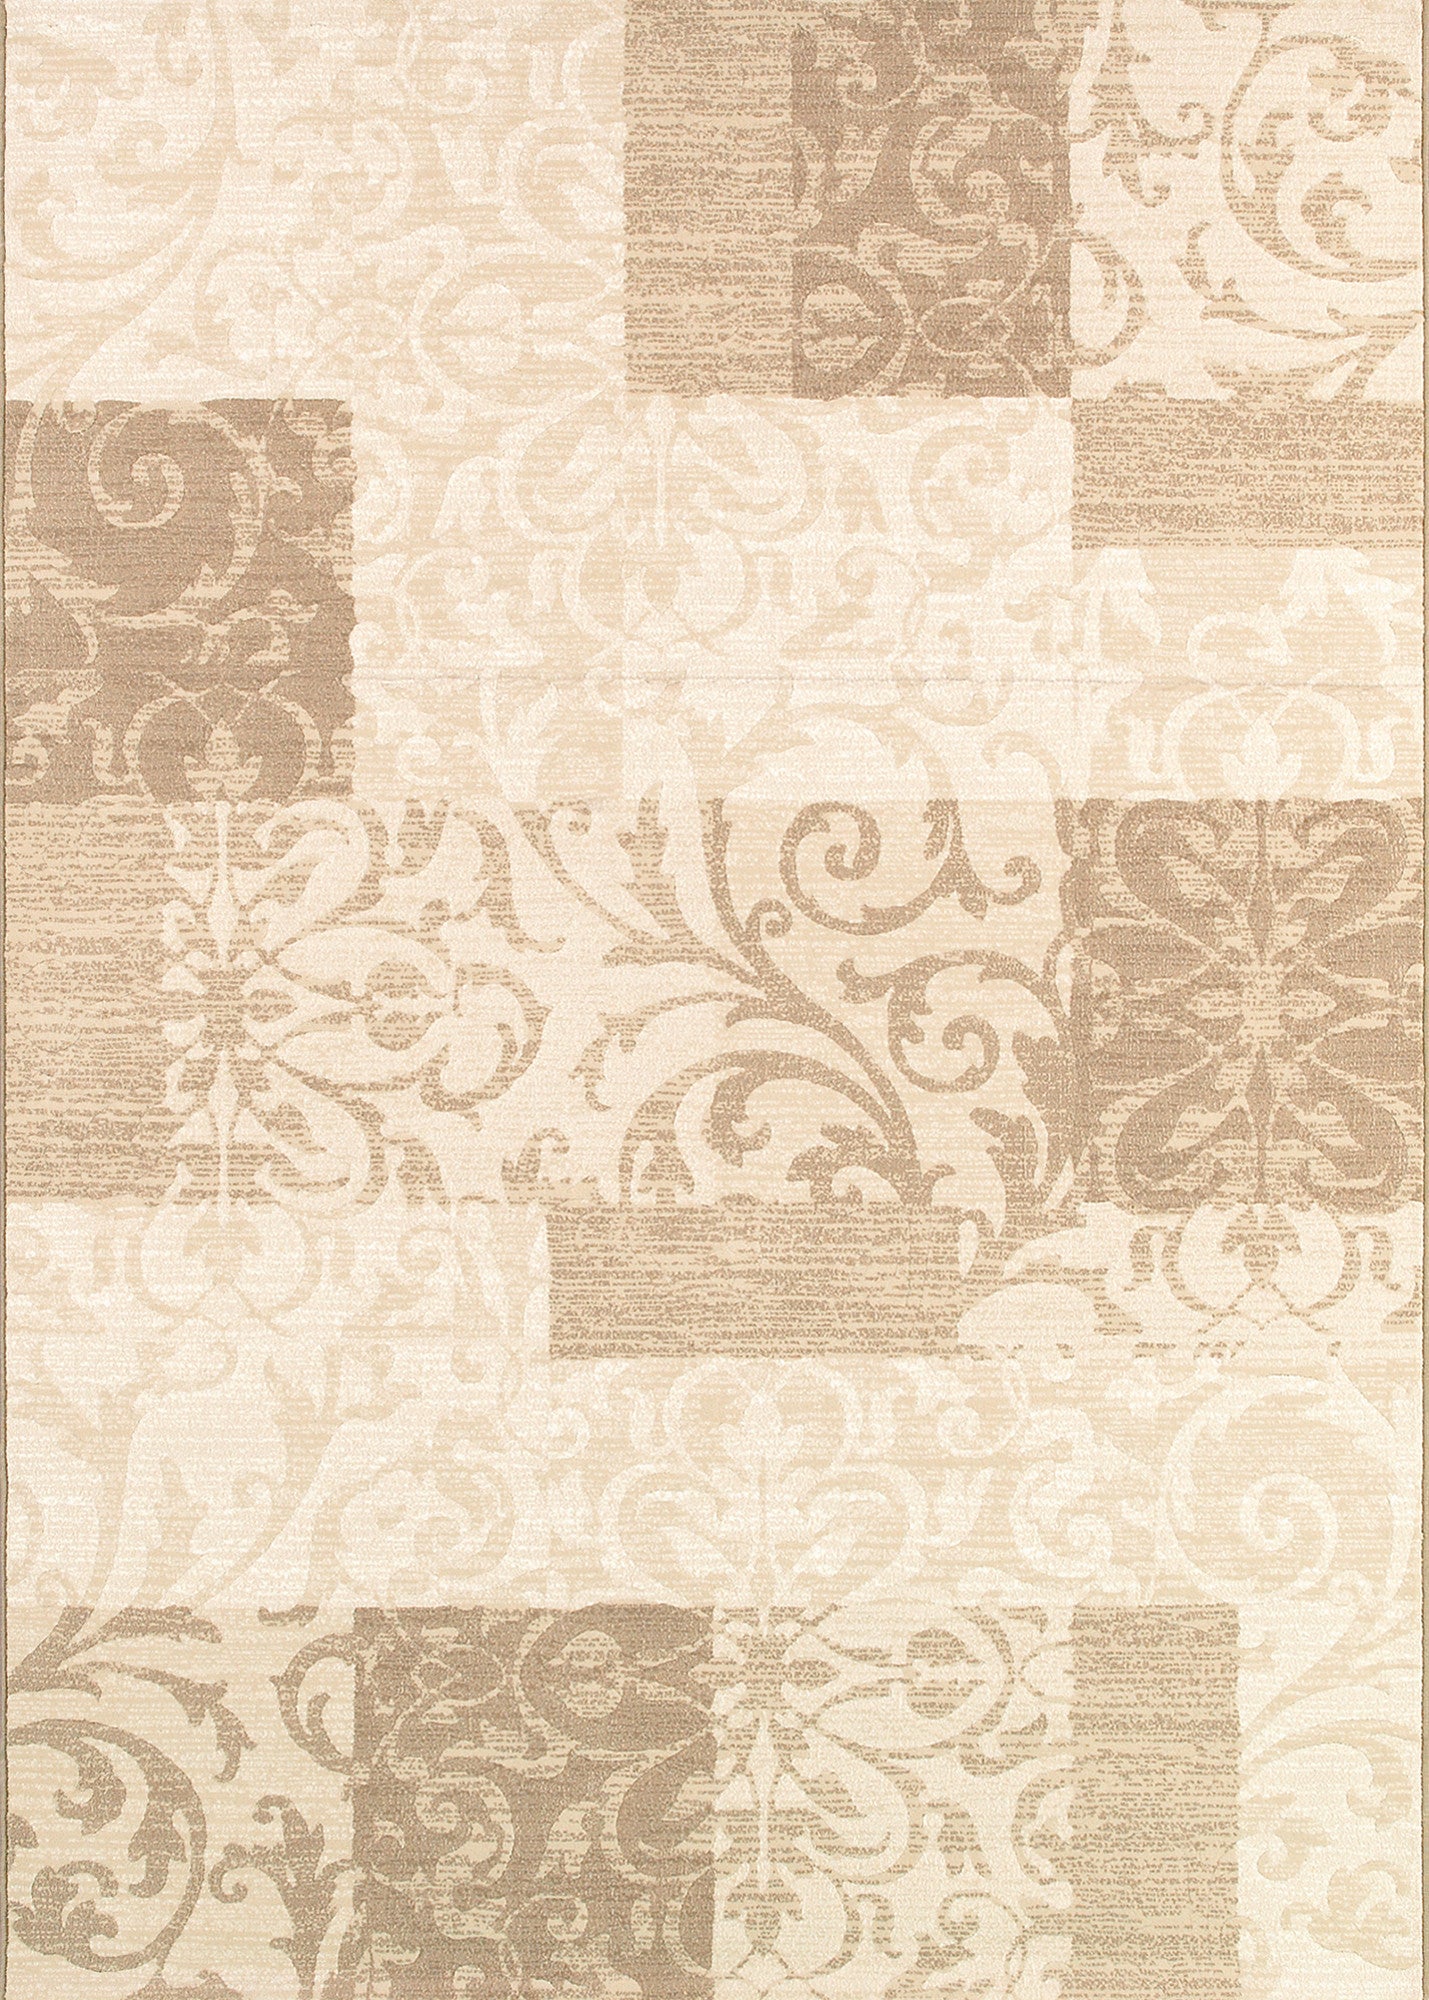 Couristan Marina Cyprus Pearl/Oyster Area Rug